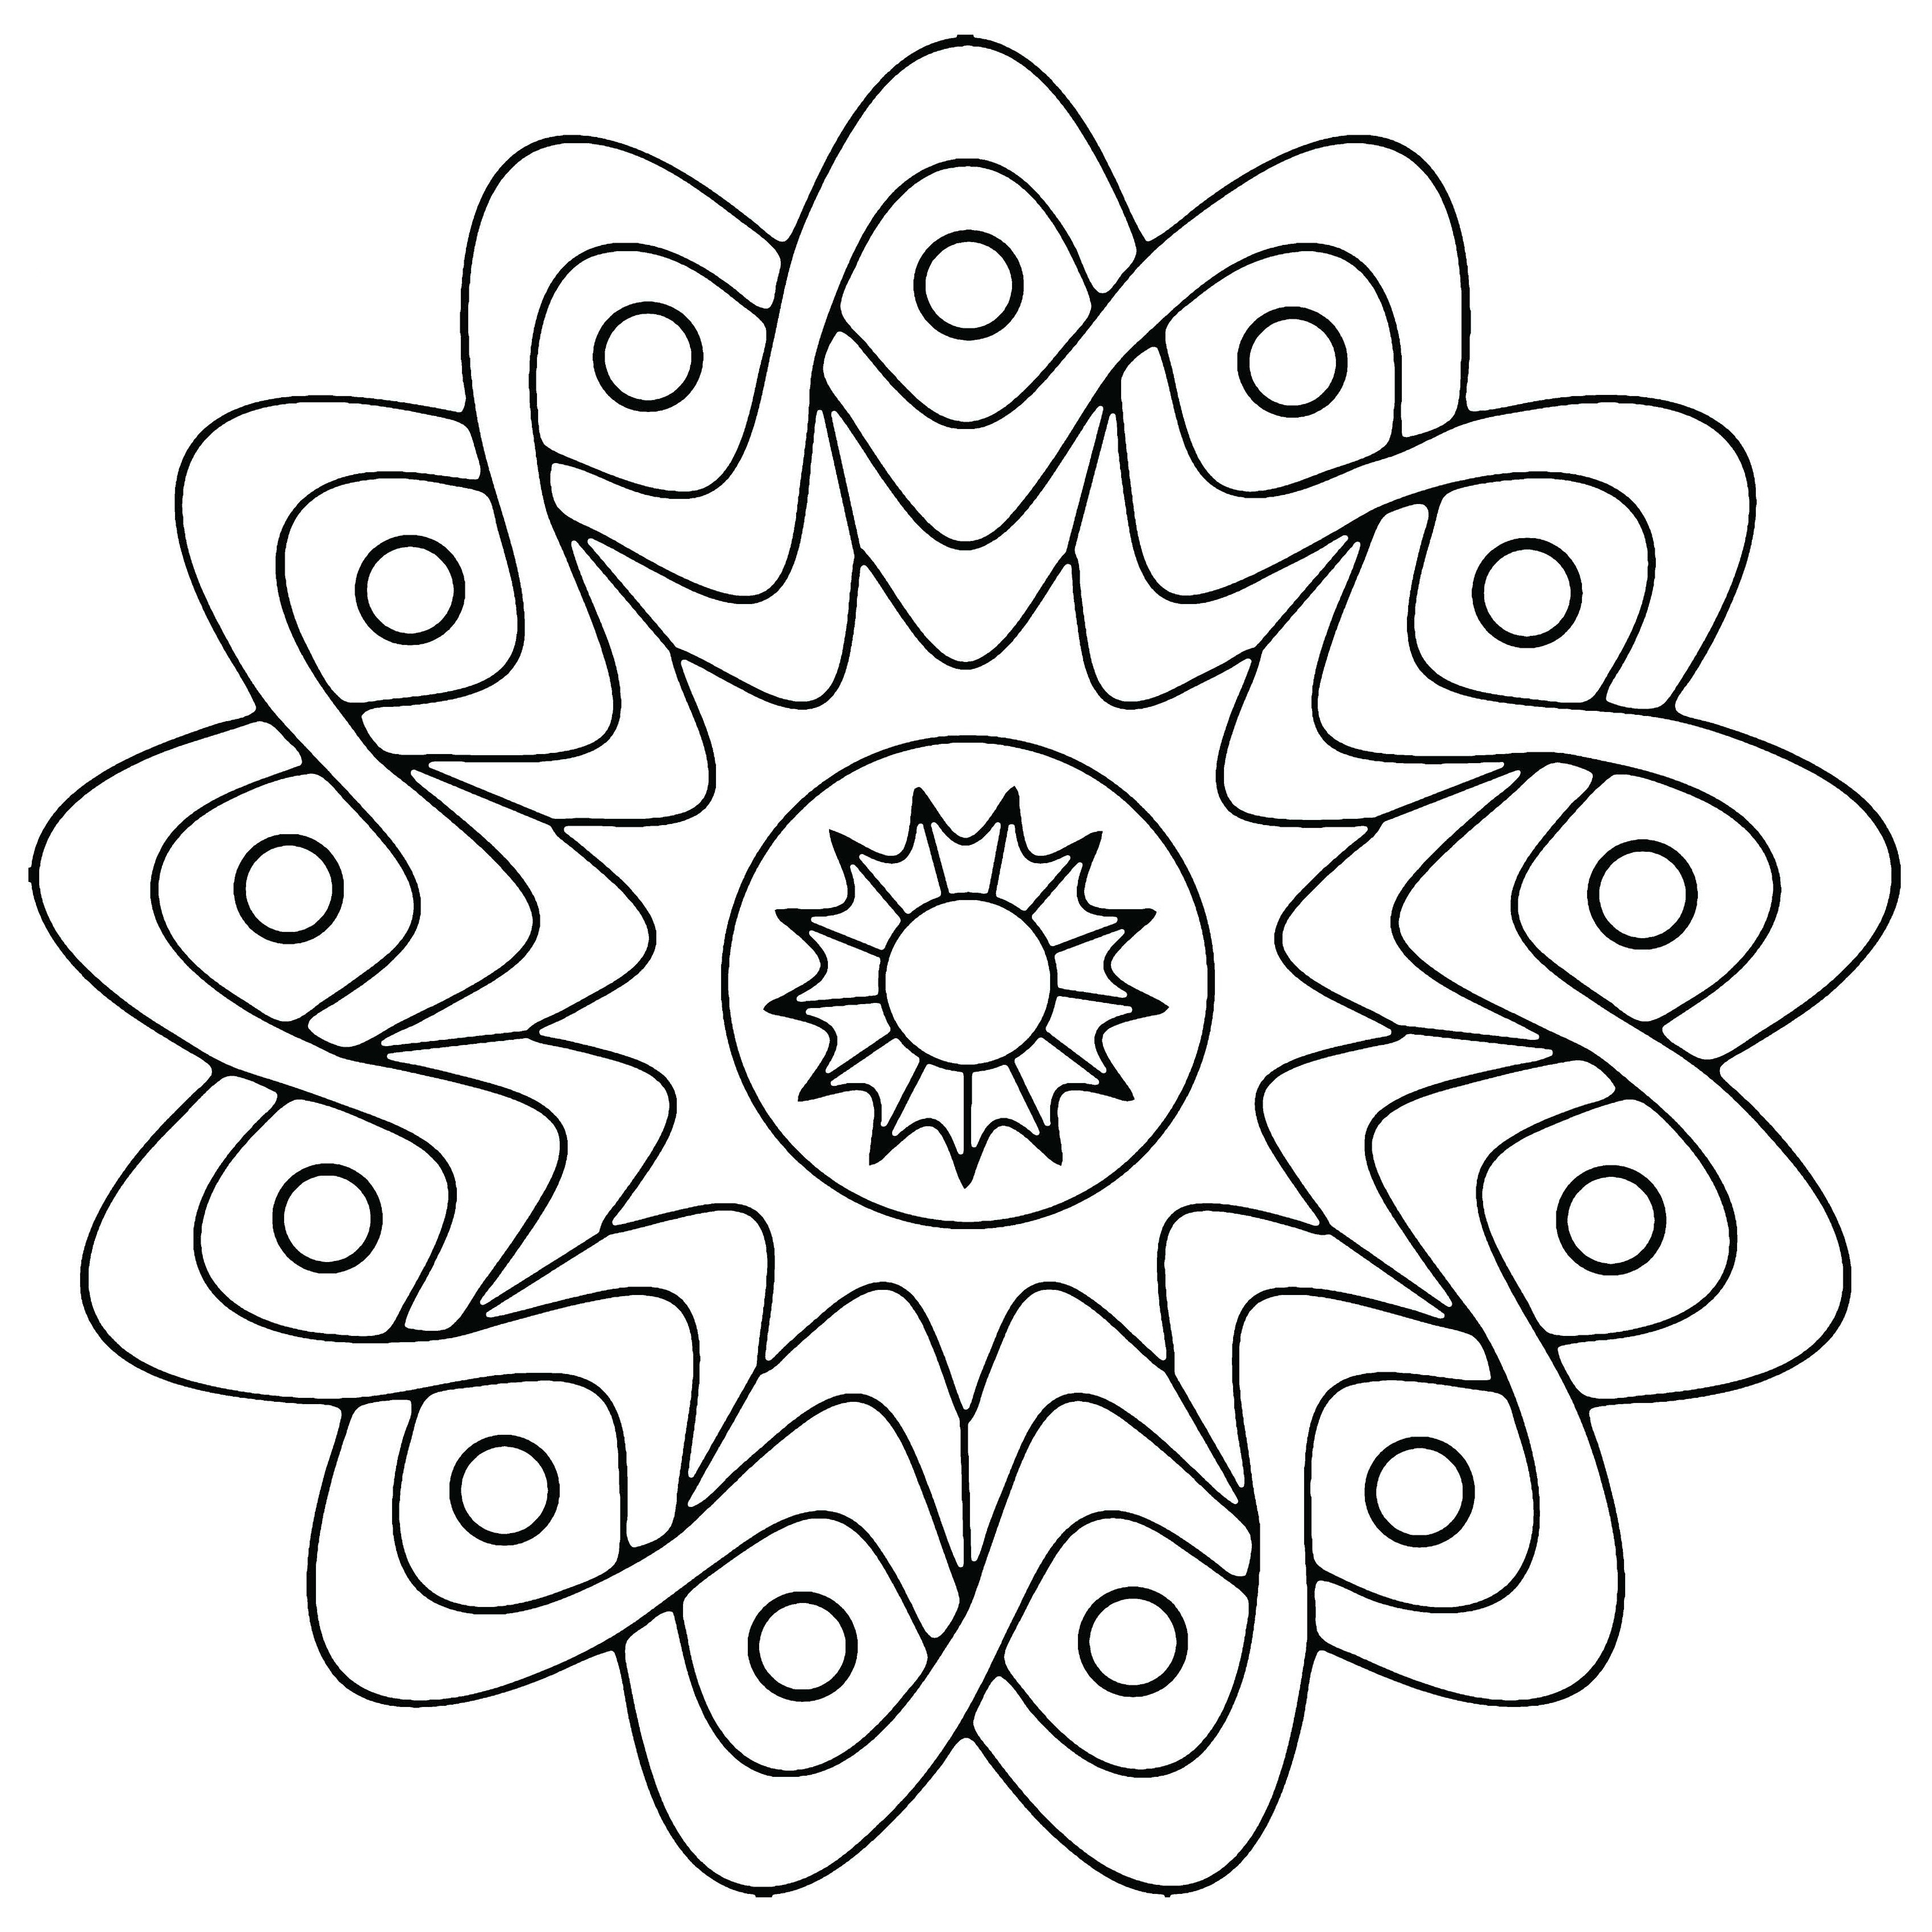 Printable Geometric Coloring Pages
 Free Printable Geometric Coloring Pages For Kids